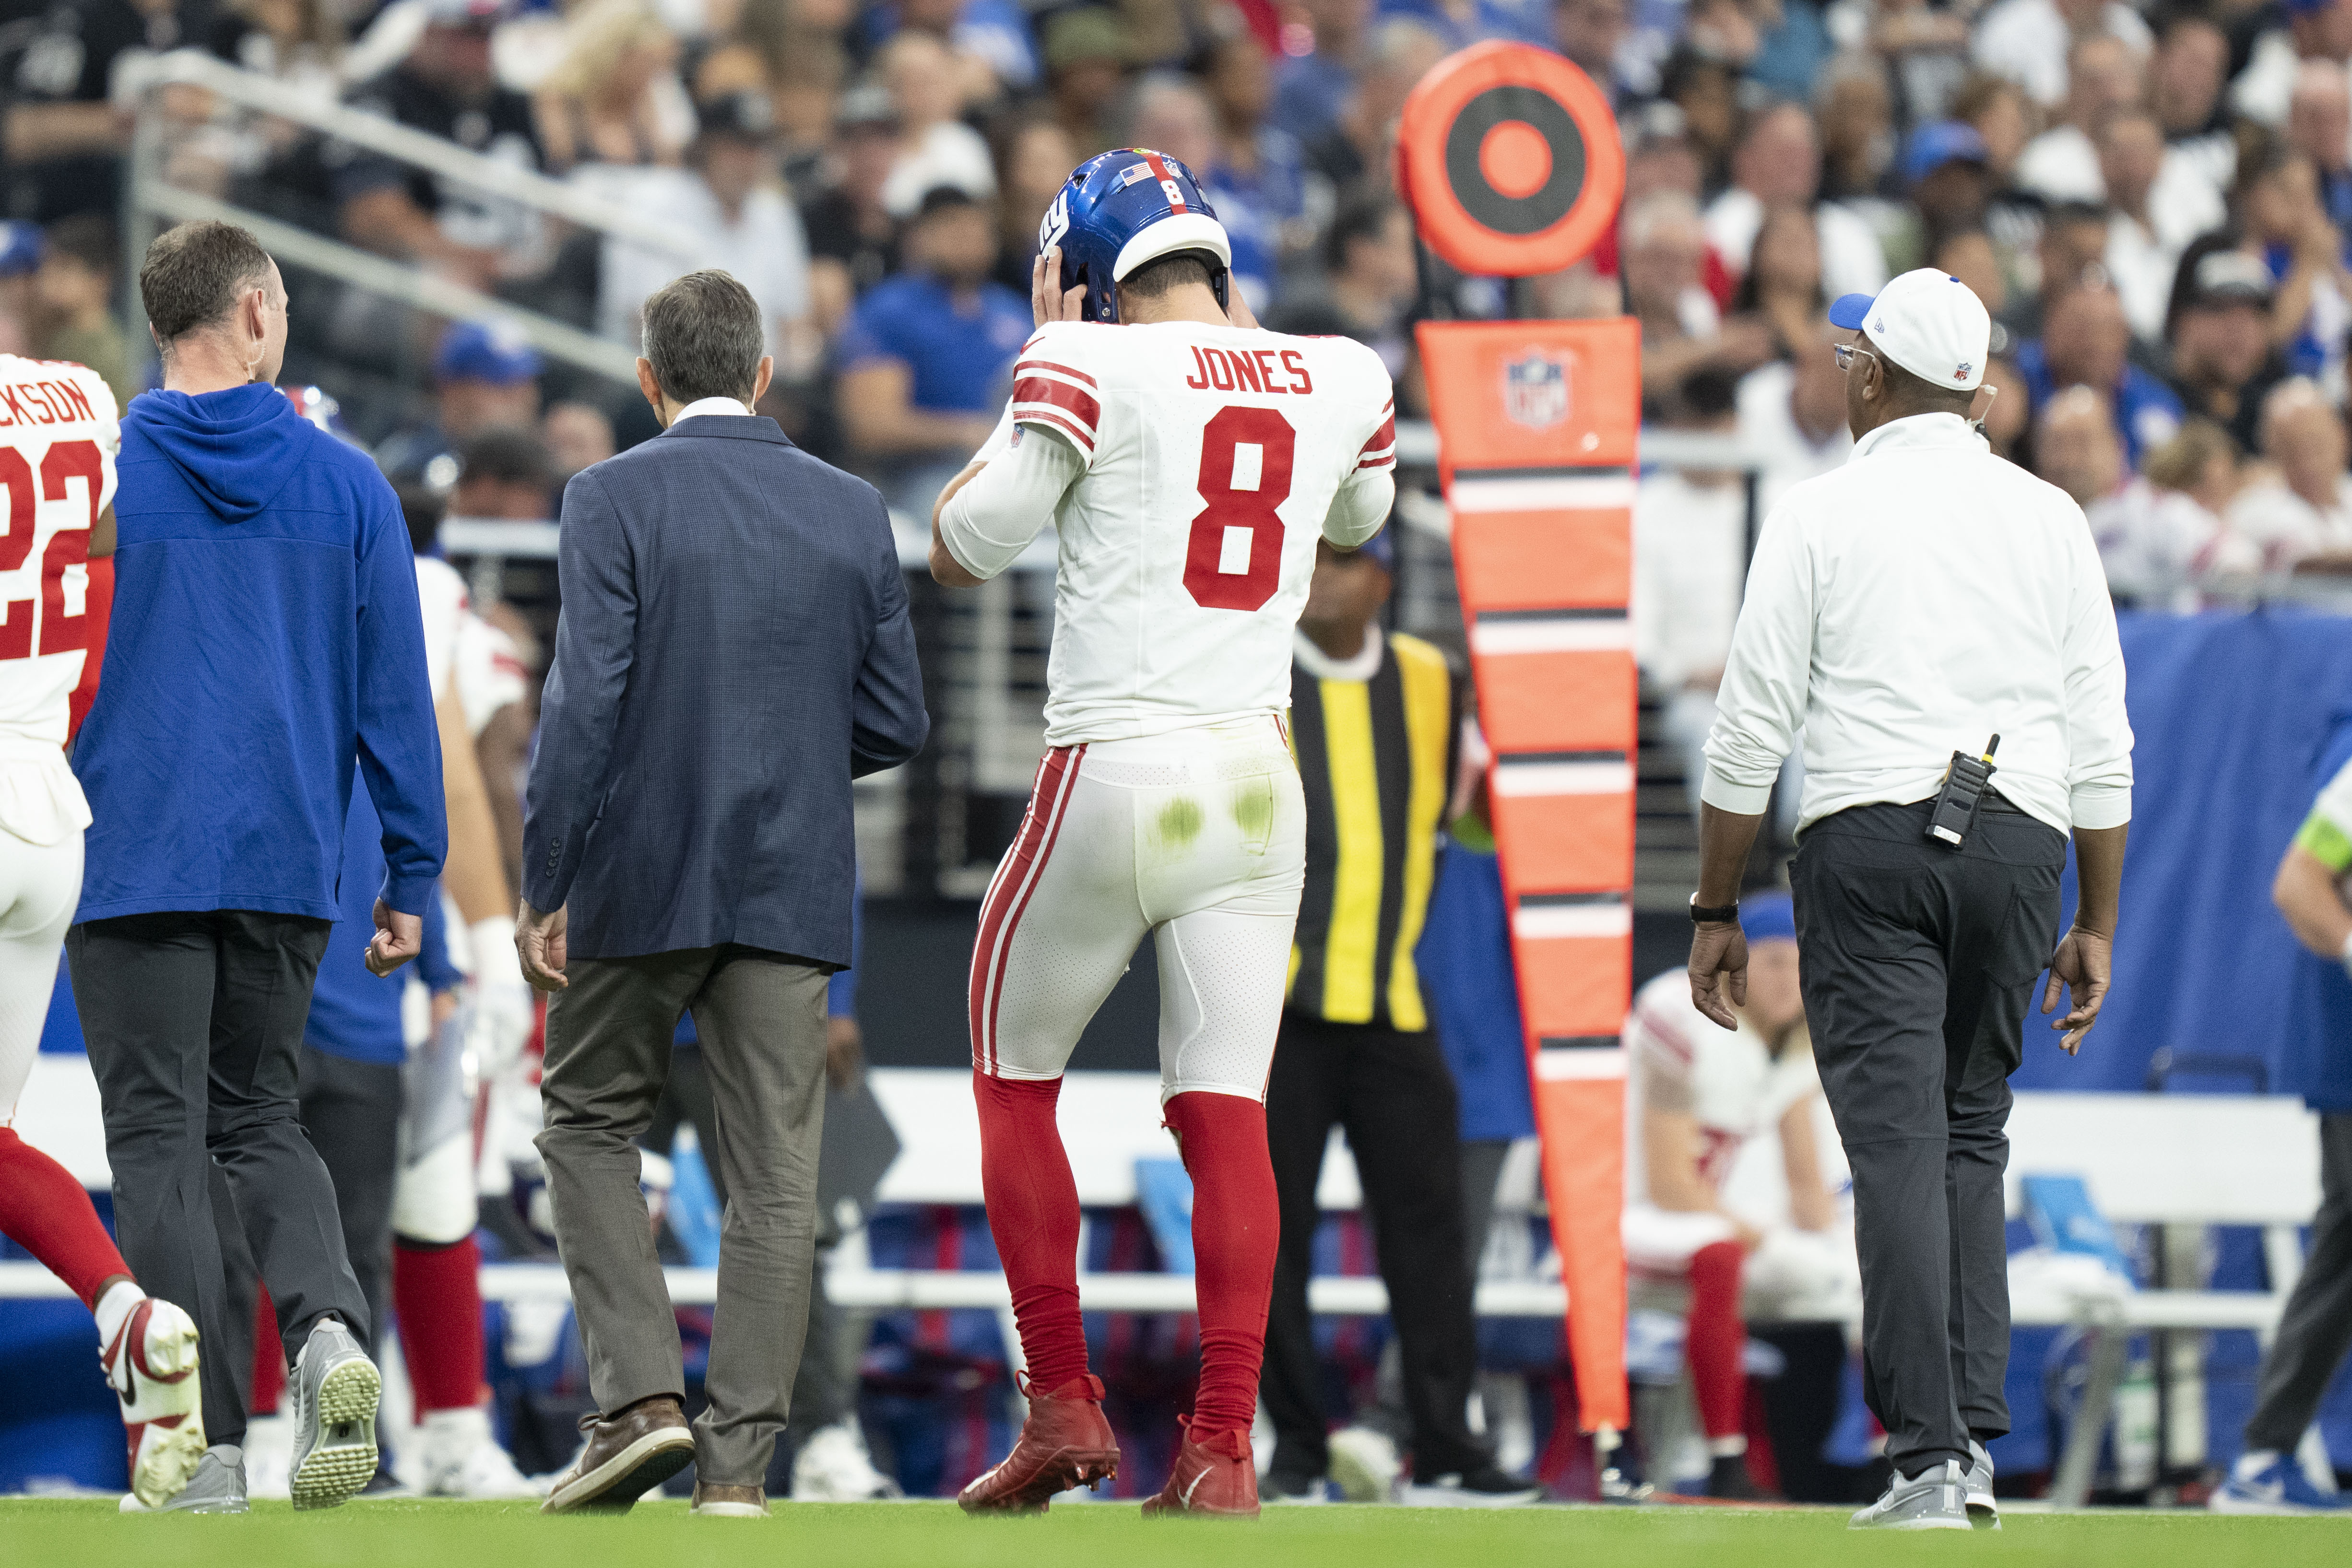 Giants quarterback Daniel Jones walks to the sideline after suffering a torn Achilles against the Raiders during the second quarter Sunday at Allegiant Stadium.